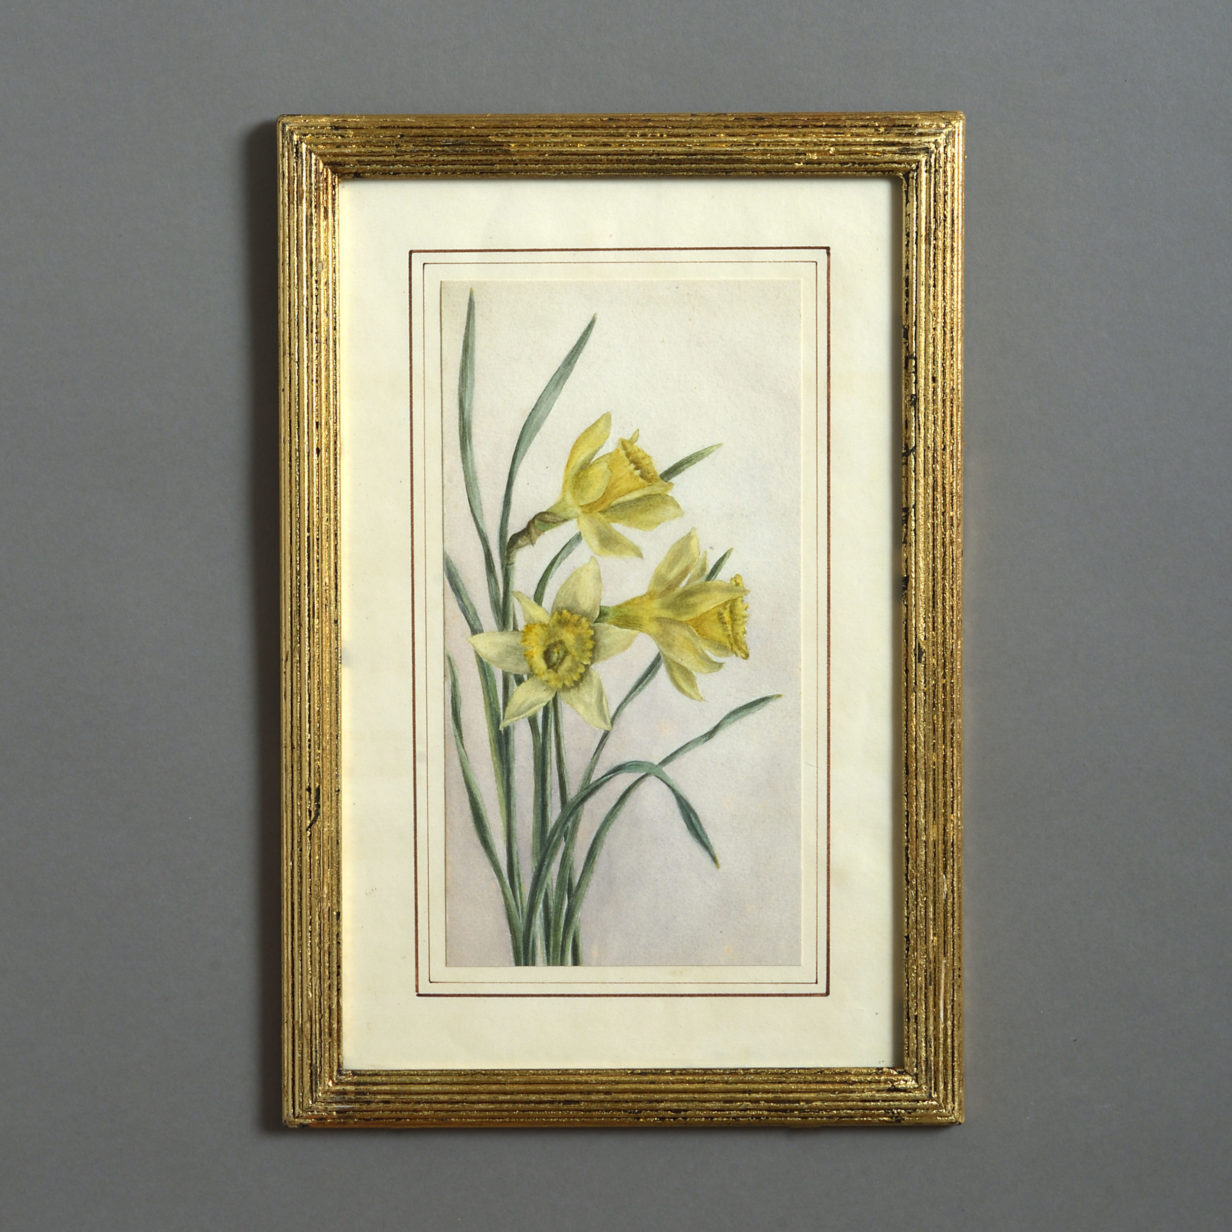 A late 19th century 19th century watercolour study of dafffodils